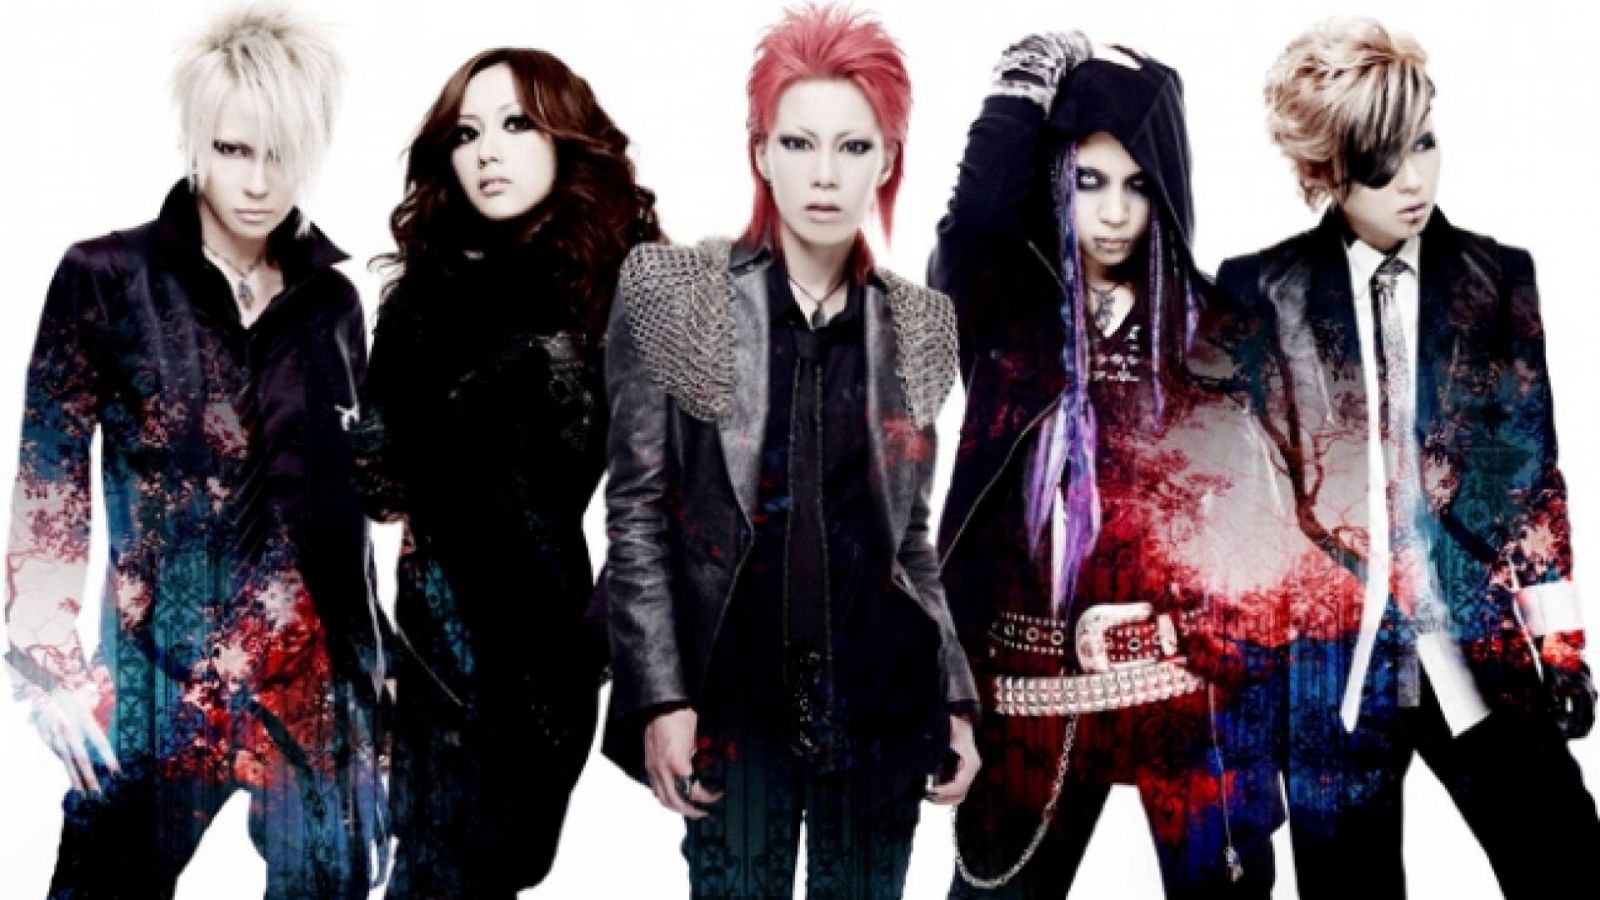 exist†trace se torna major © exist†trace / Monsters, Inc.